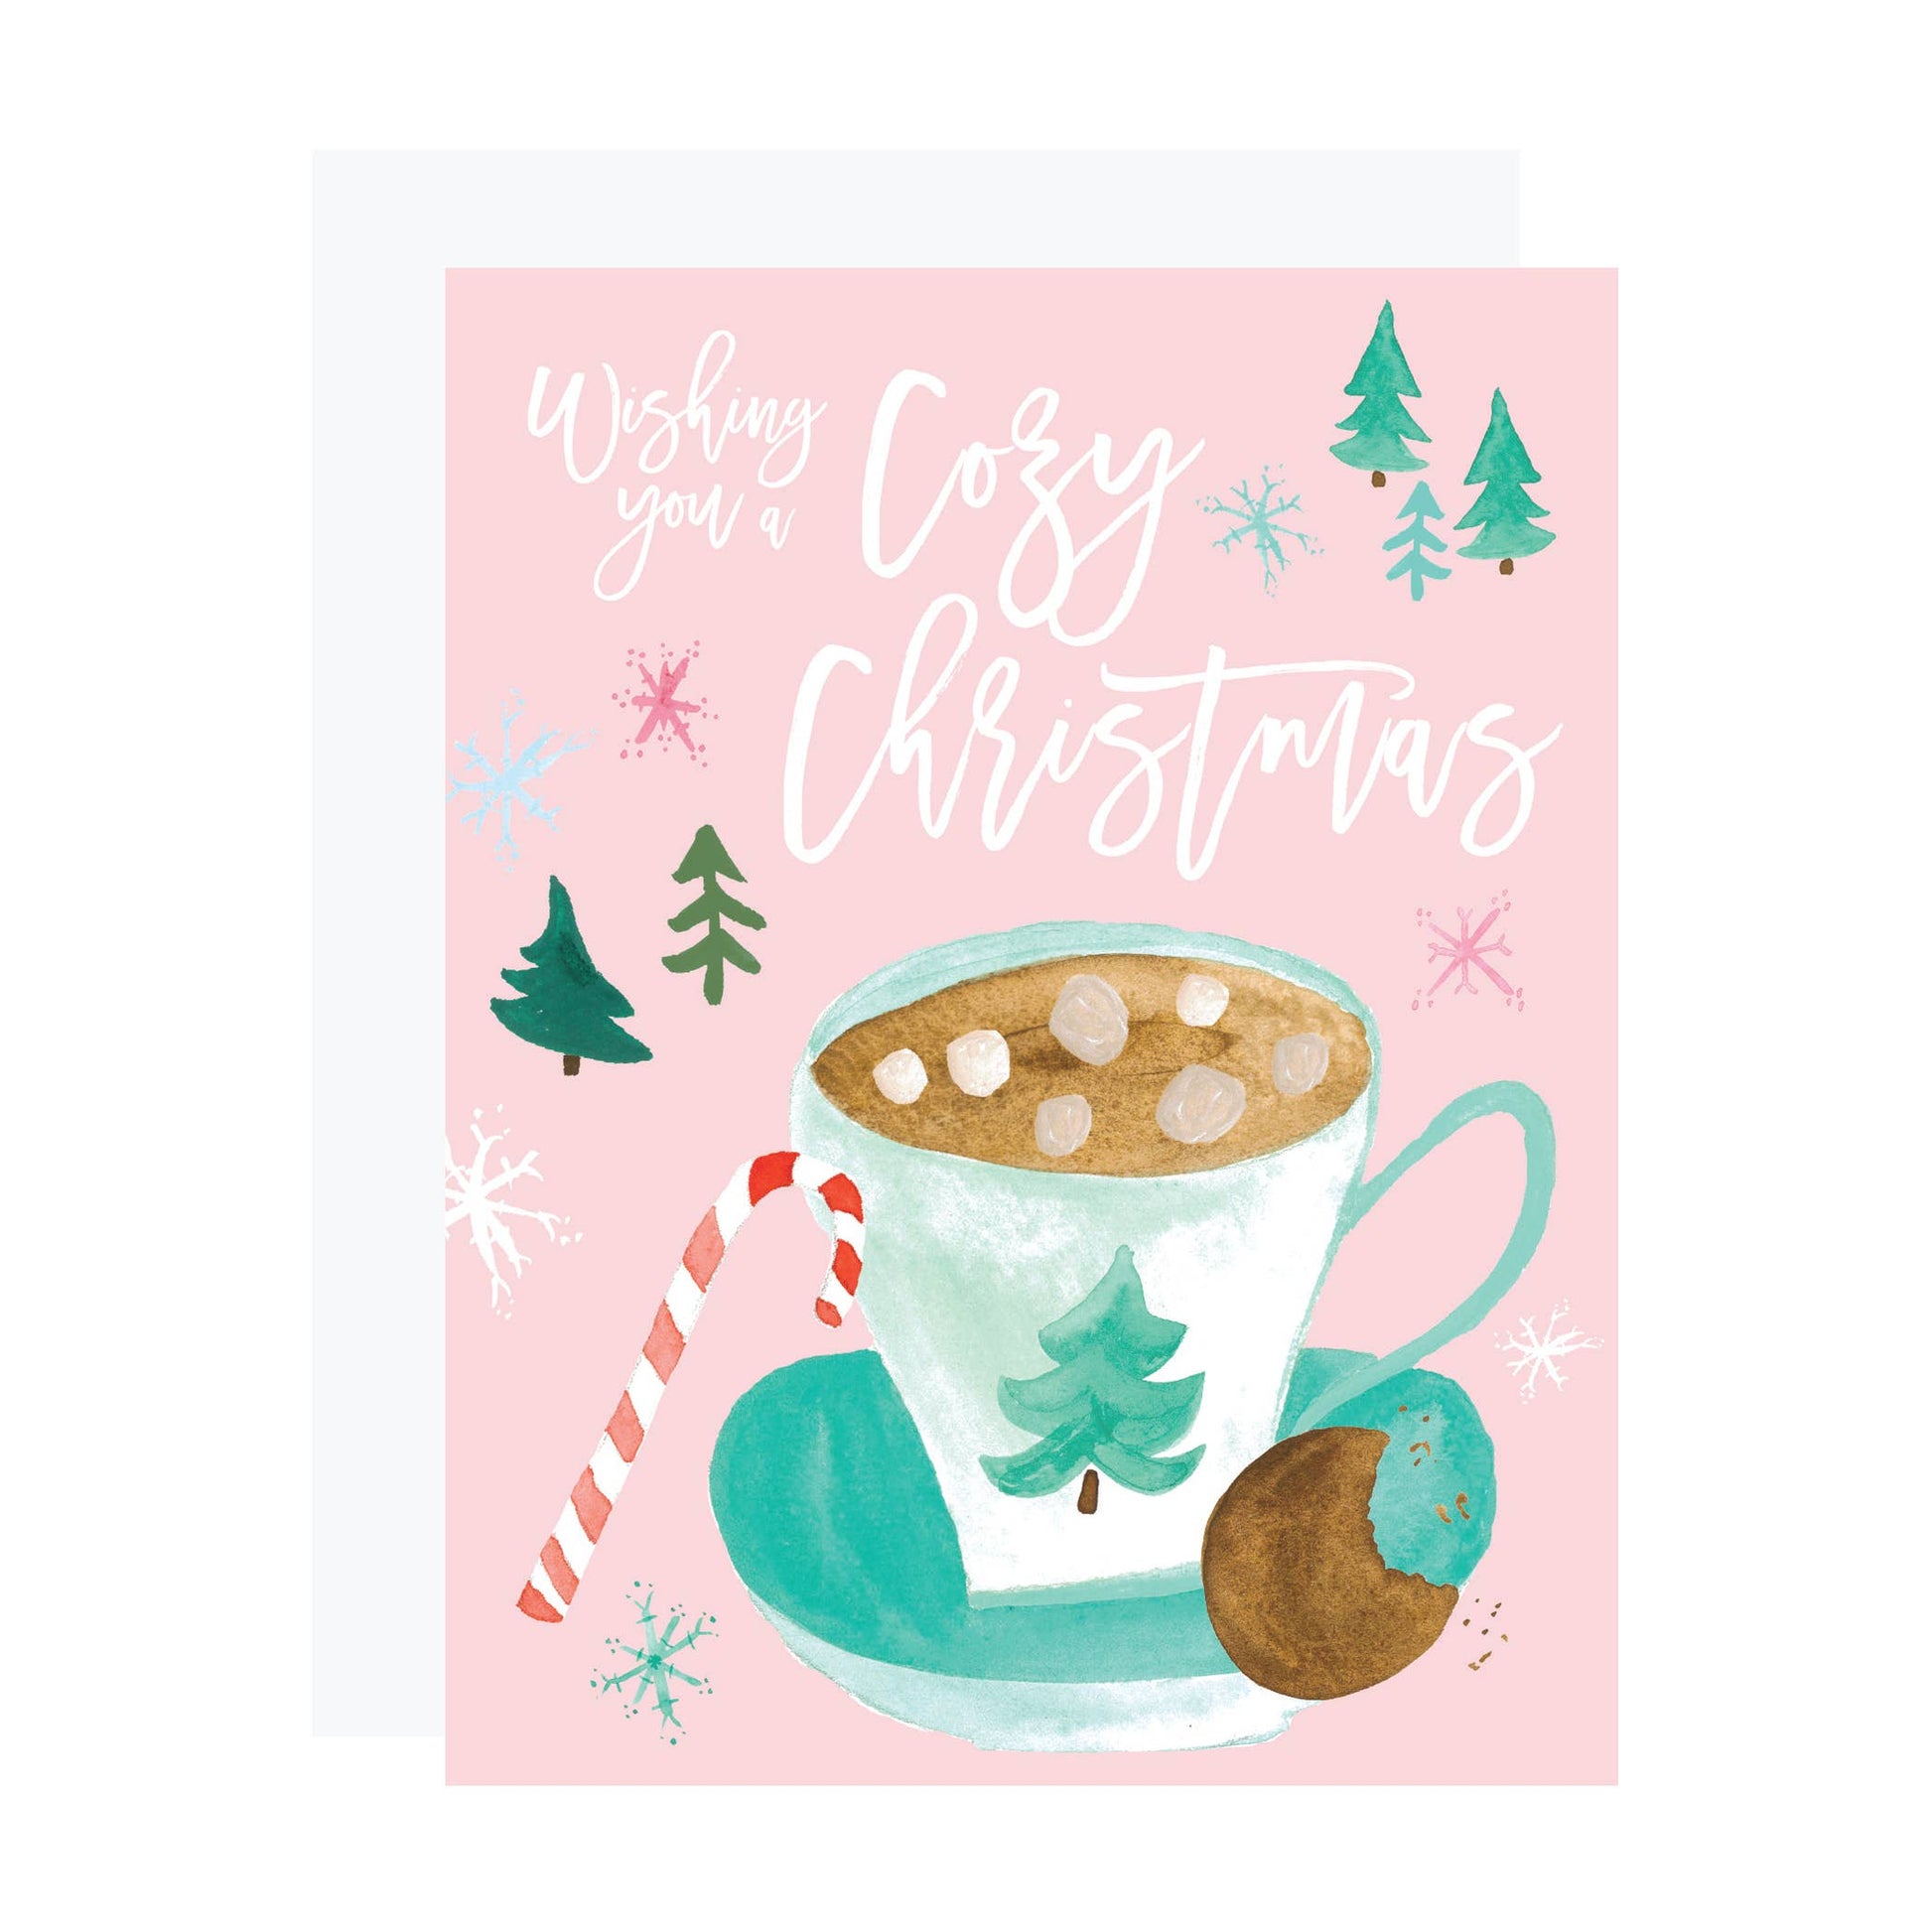 Holiday greeting card with text that reads "Wishing You A Cozy Christmas" and has images of pine trees, hot chocolate with marshmallows, a candy cane and cookie 